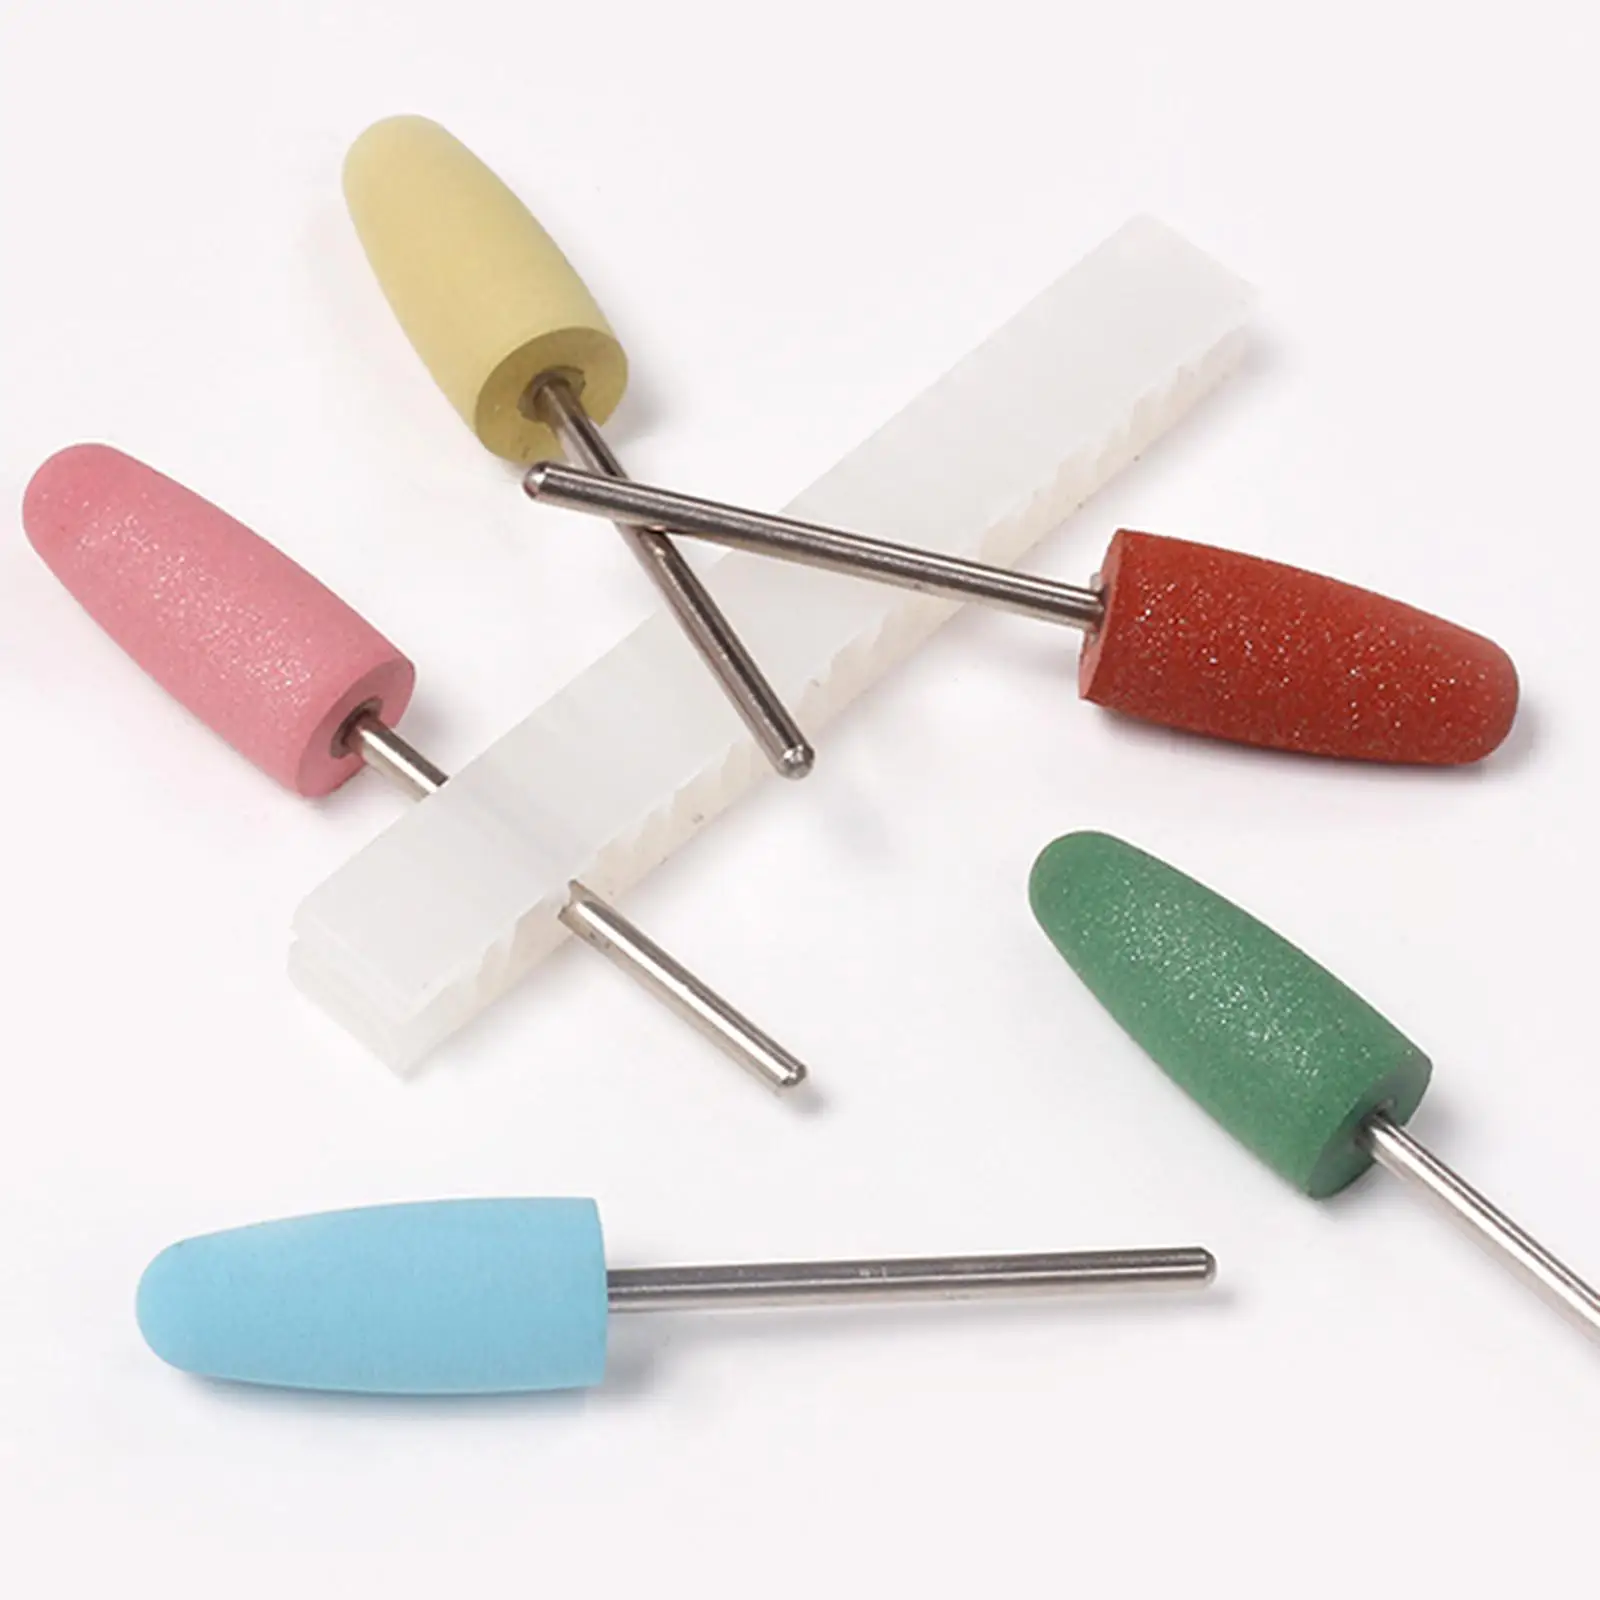 5 Pieces Rubber Nail Accessories Calluses Removal Nails files Bit Buffing